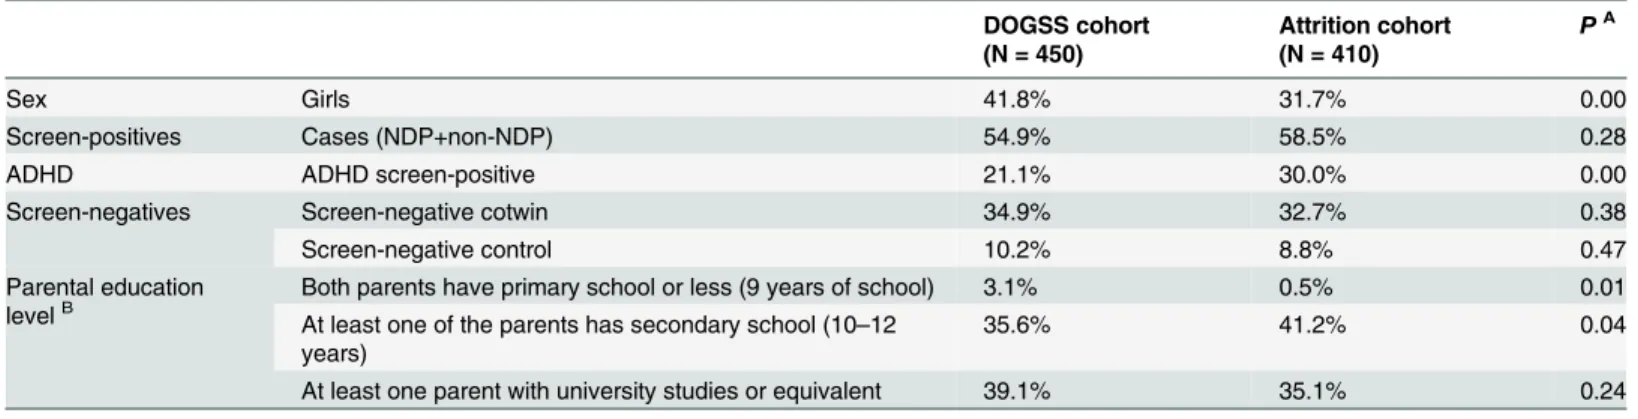 Table 1. Descriptive statistics. Comparison of frequencies in the DOGSS cohort and the attrition cohort.